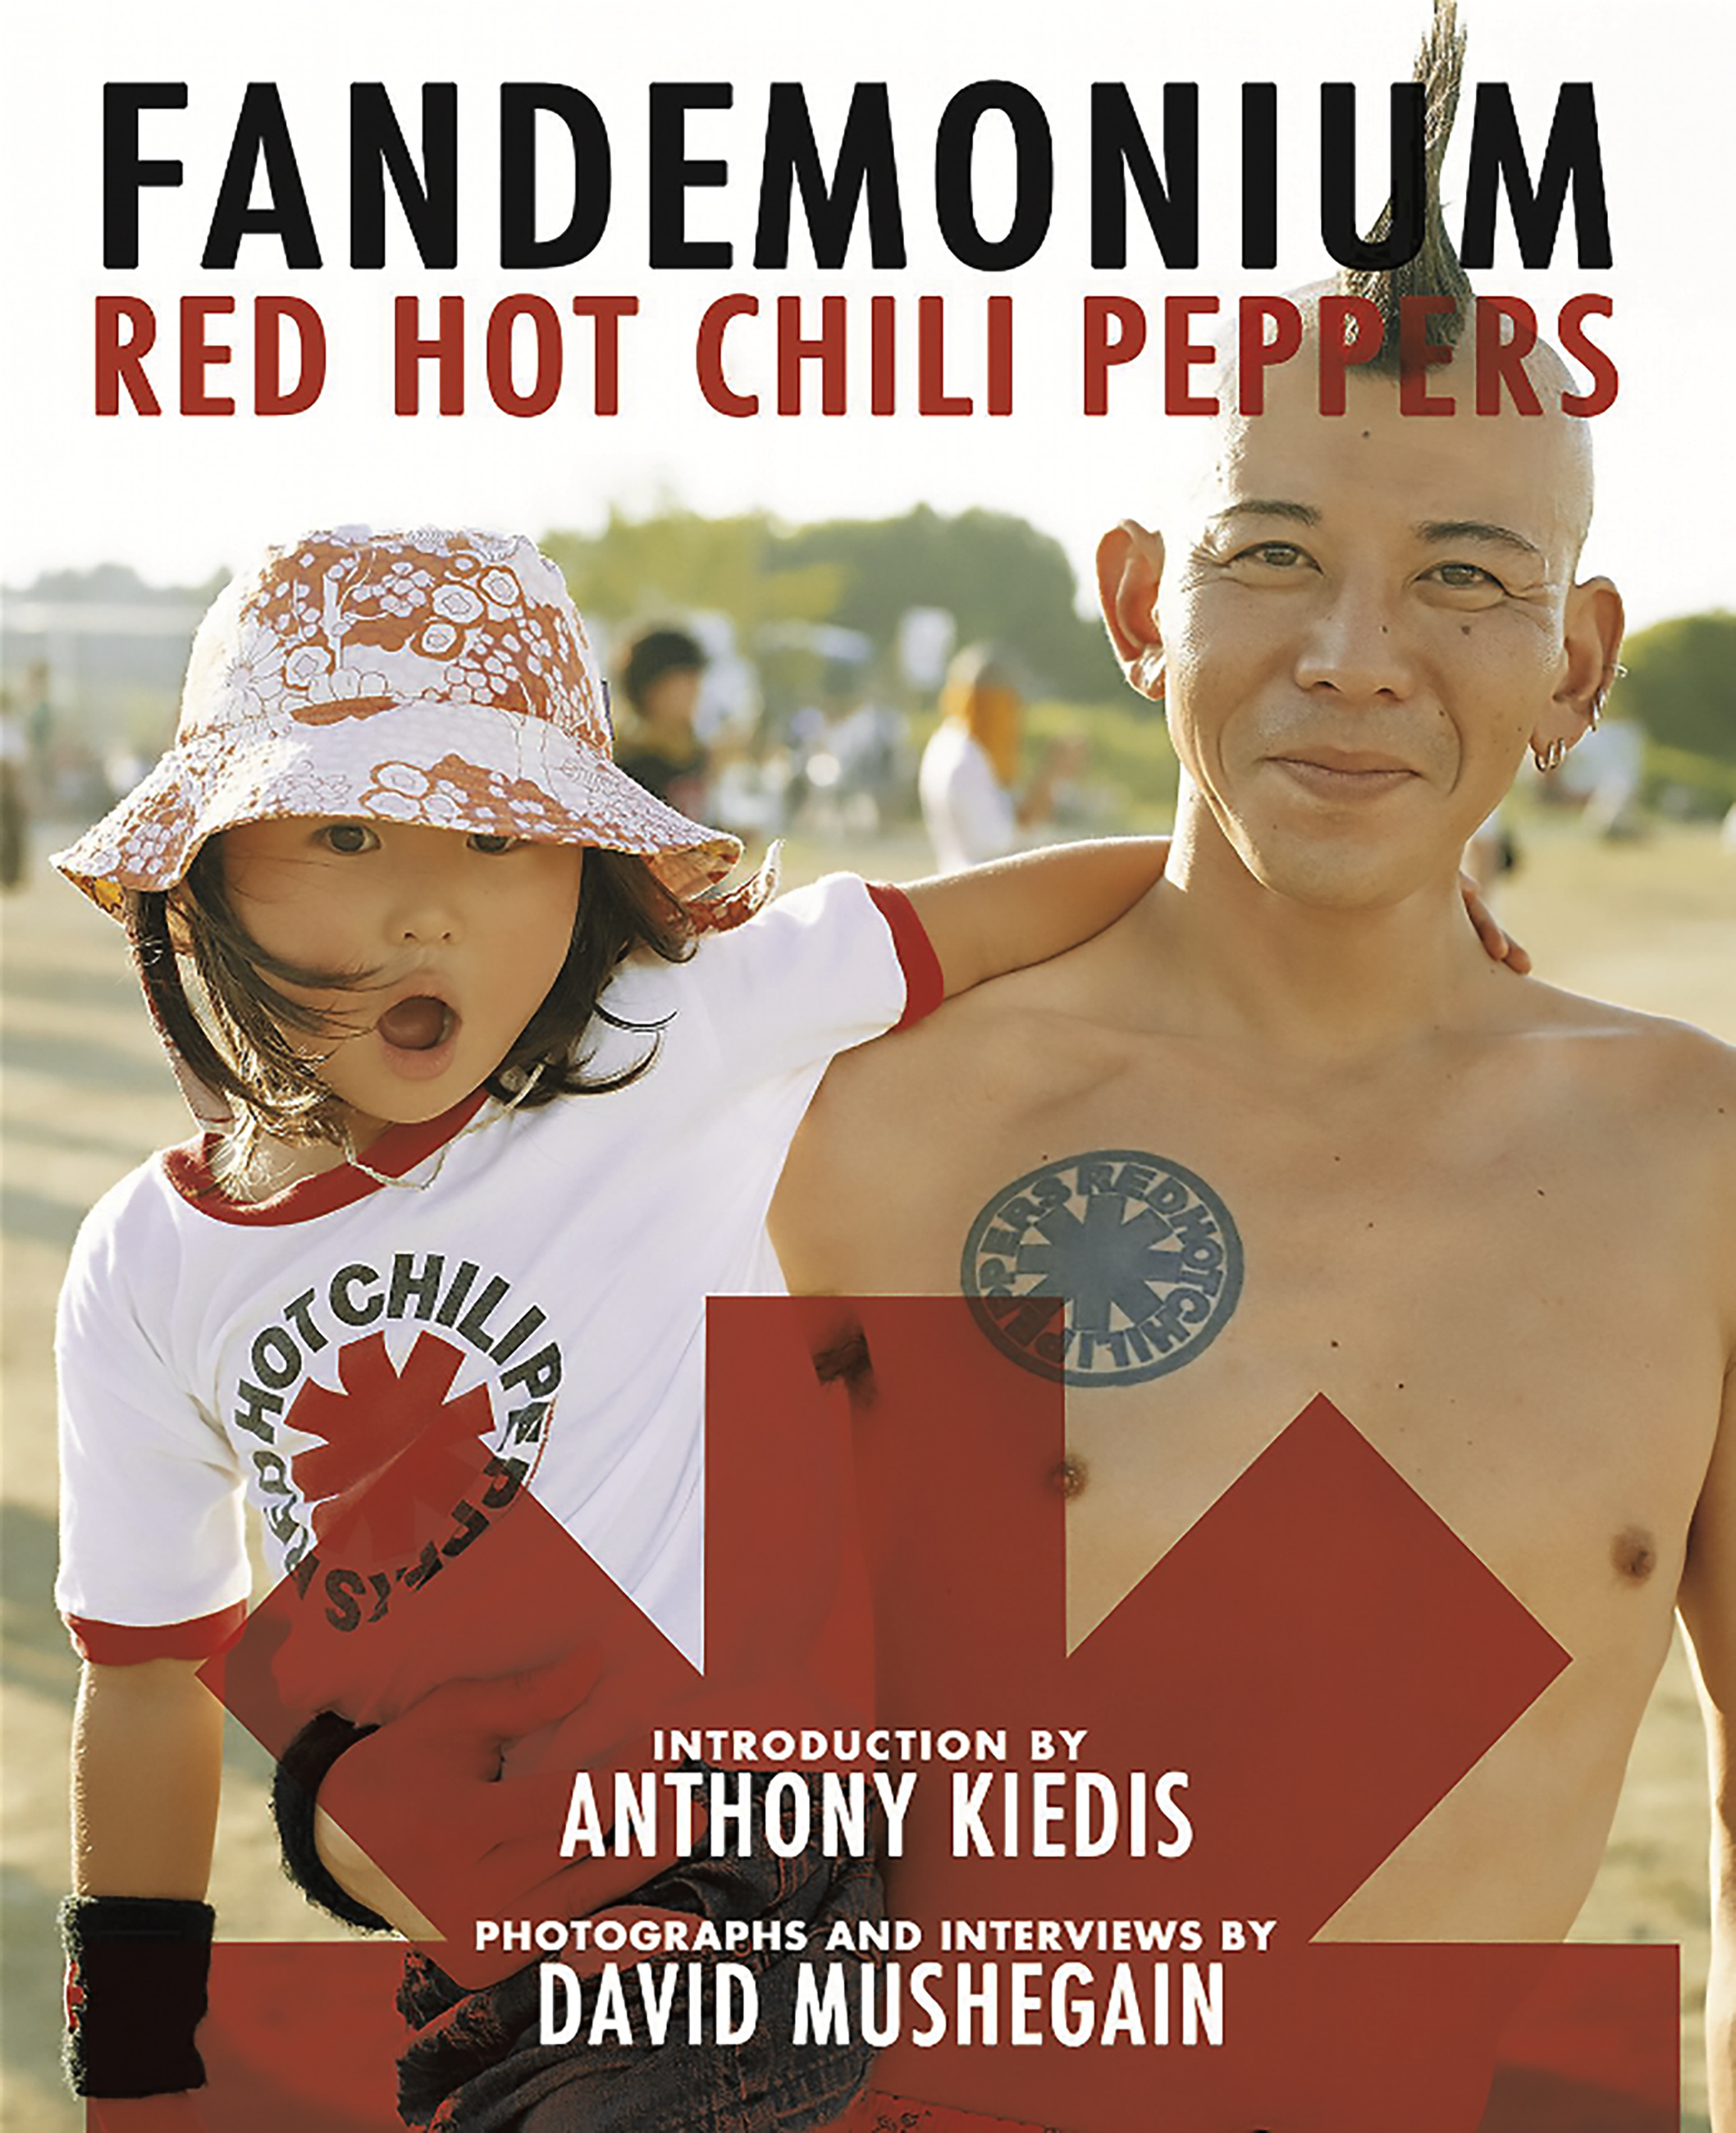 Verdensrekord Guinness Book Udseende Se tilbage Red Hot Chili Peppers: Fandemonium by The Red Hot Chili Peppers | Hachette  Book Group